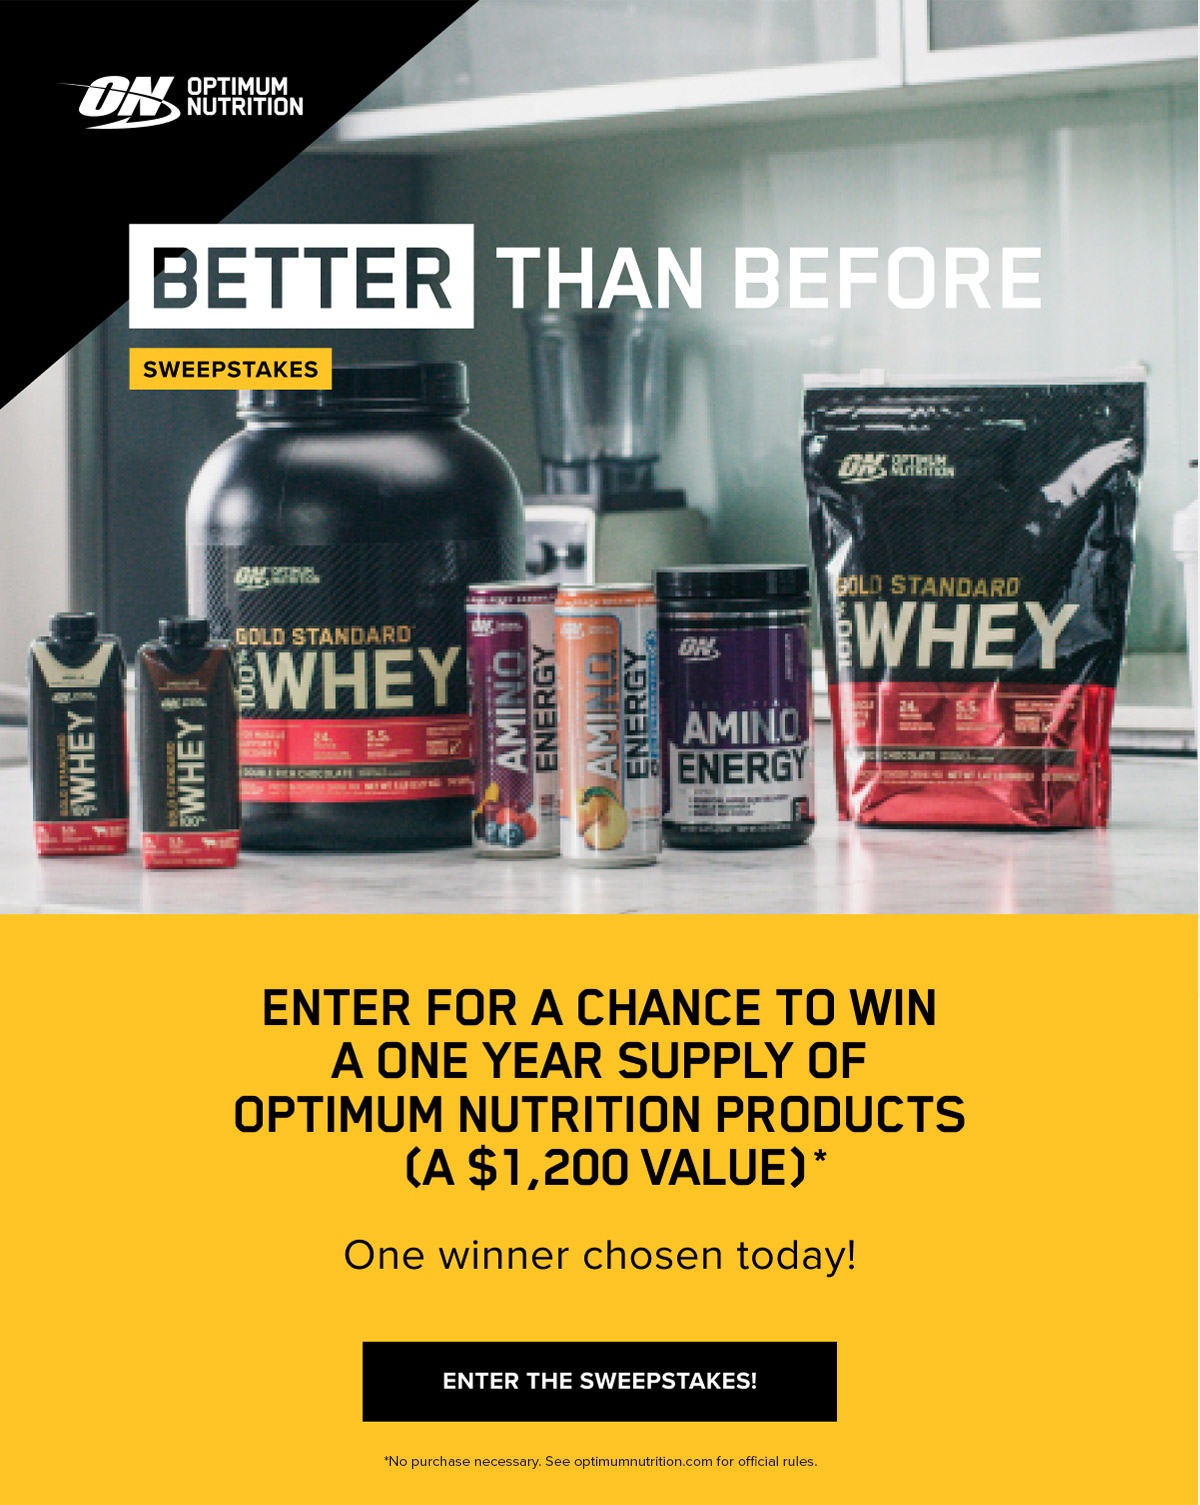 BETTER THAN BEFORE SWEEPSTAKES Enter For A Chance To Win A One Year Supply Of Optimum Nutrition Products (A $1,200 Value)* One winner chosen today! Enter The Sweepstakes *No purchase necessary. See optimumnutrition.com for official rules.